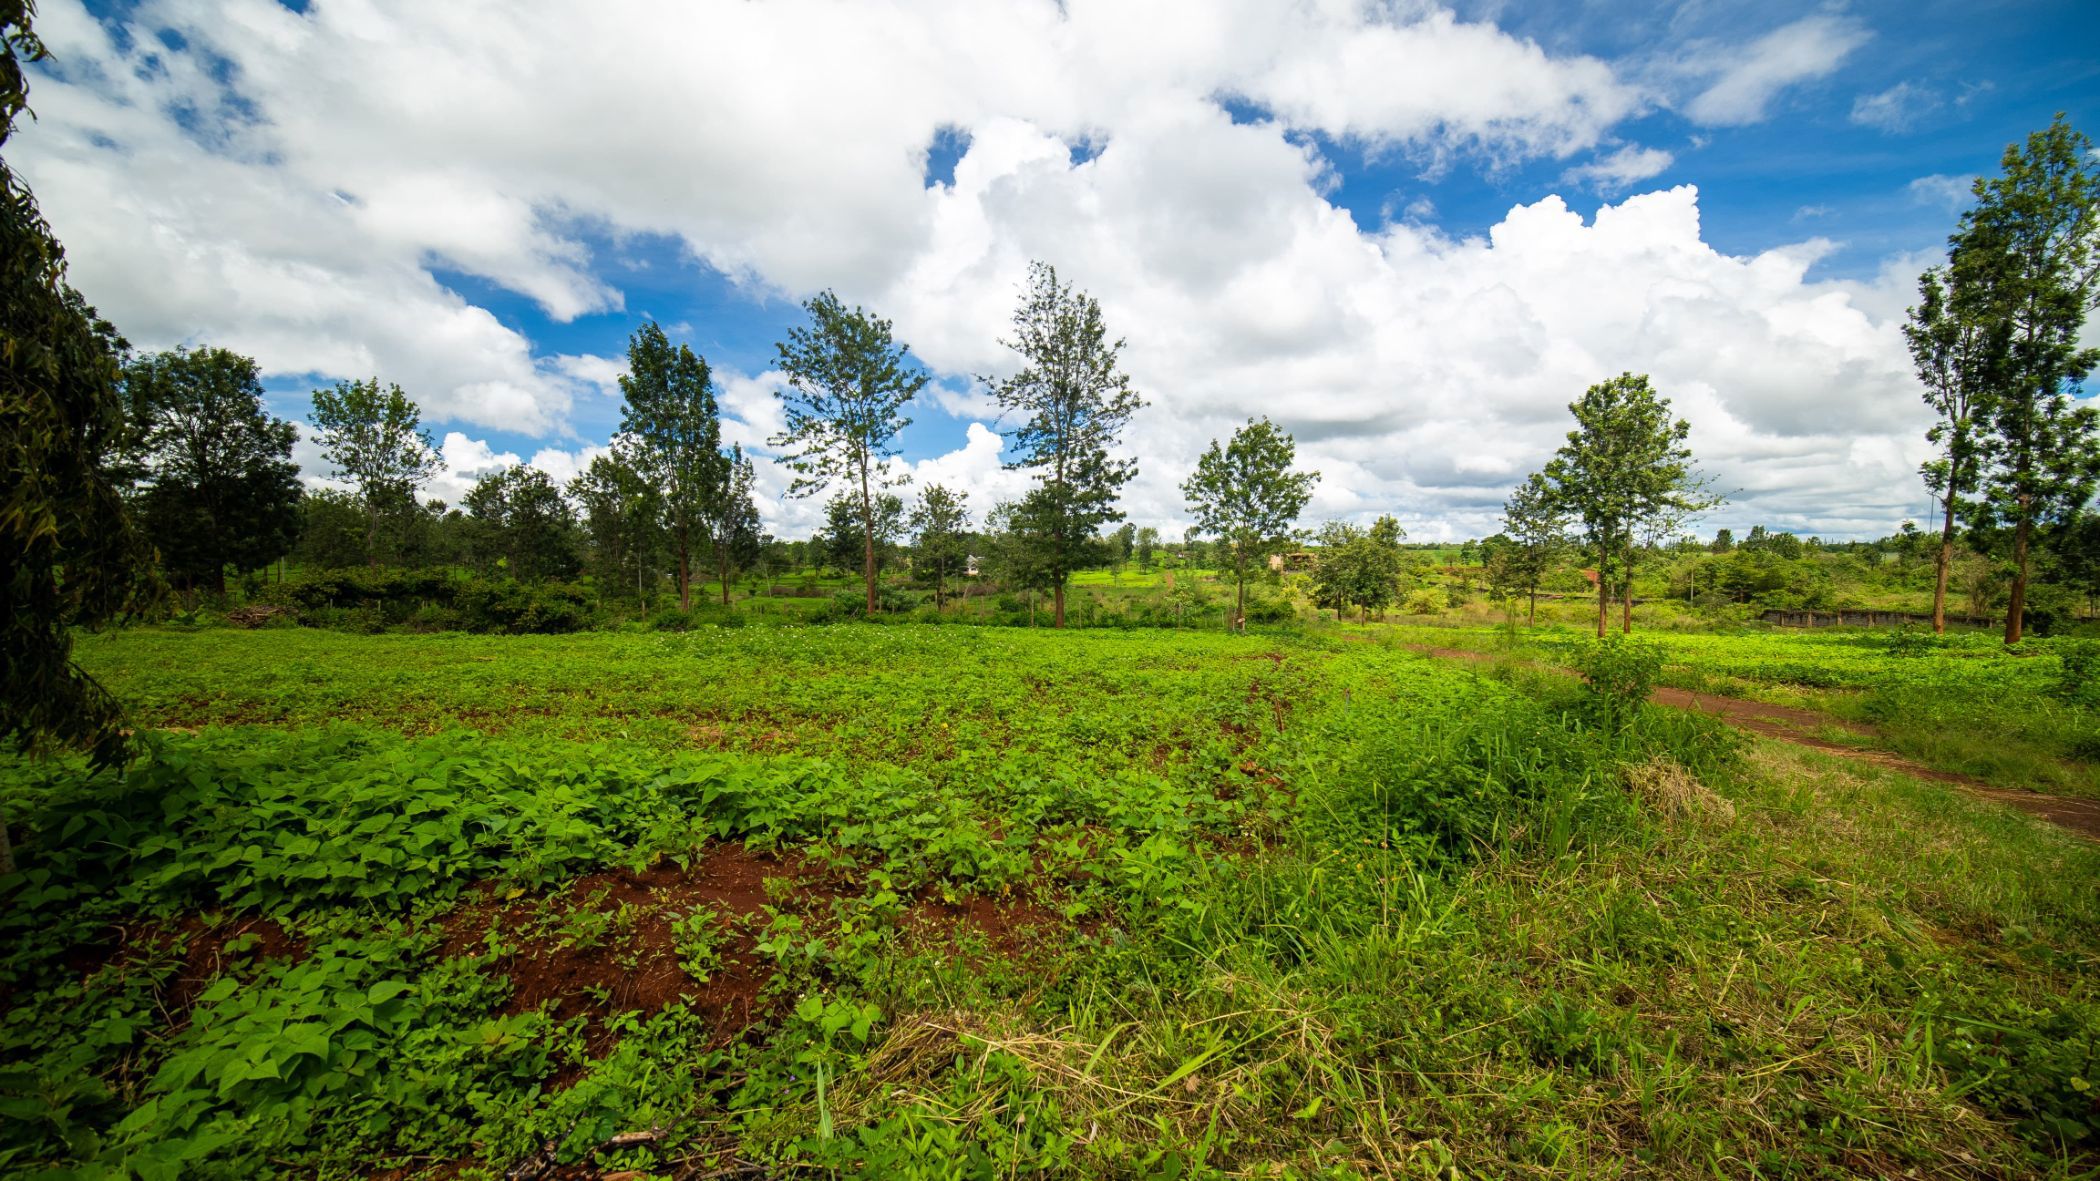 0.25 acres vacant land for sale in Thika (Kenya)